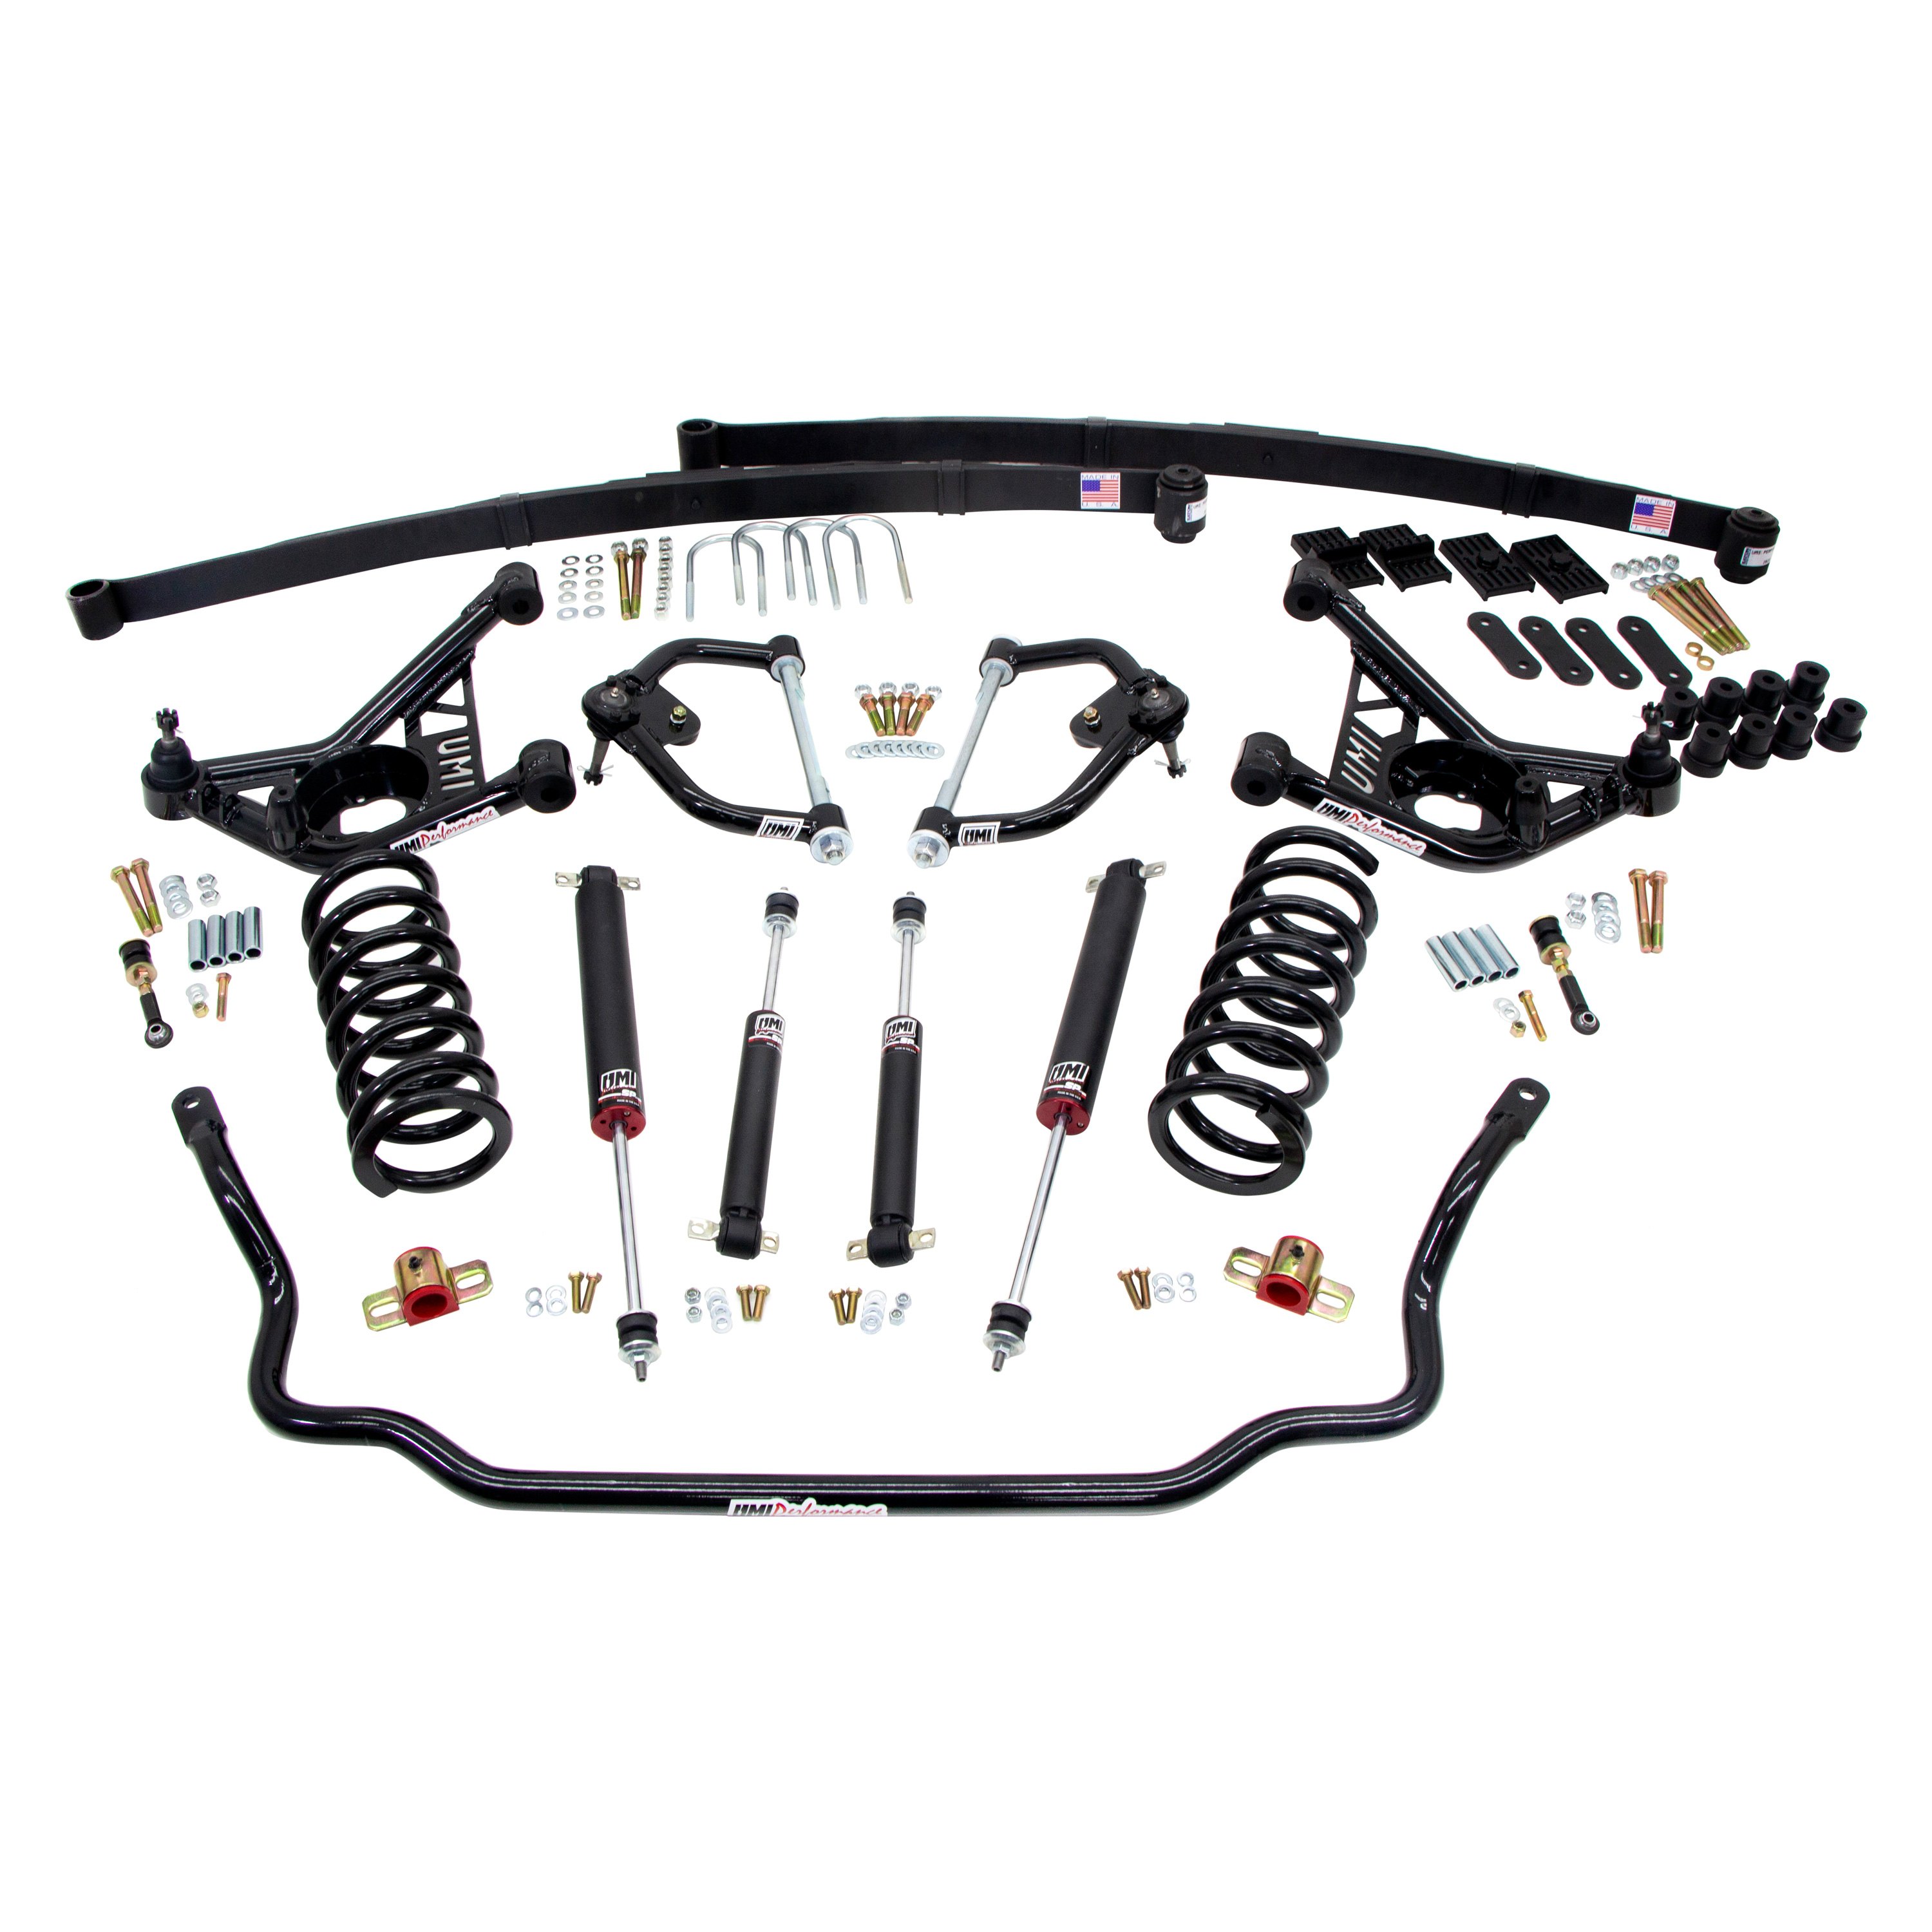 UMI Performance ® - Stage 2 Front and Rear Handling Lowering Kit.